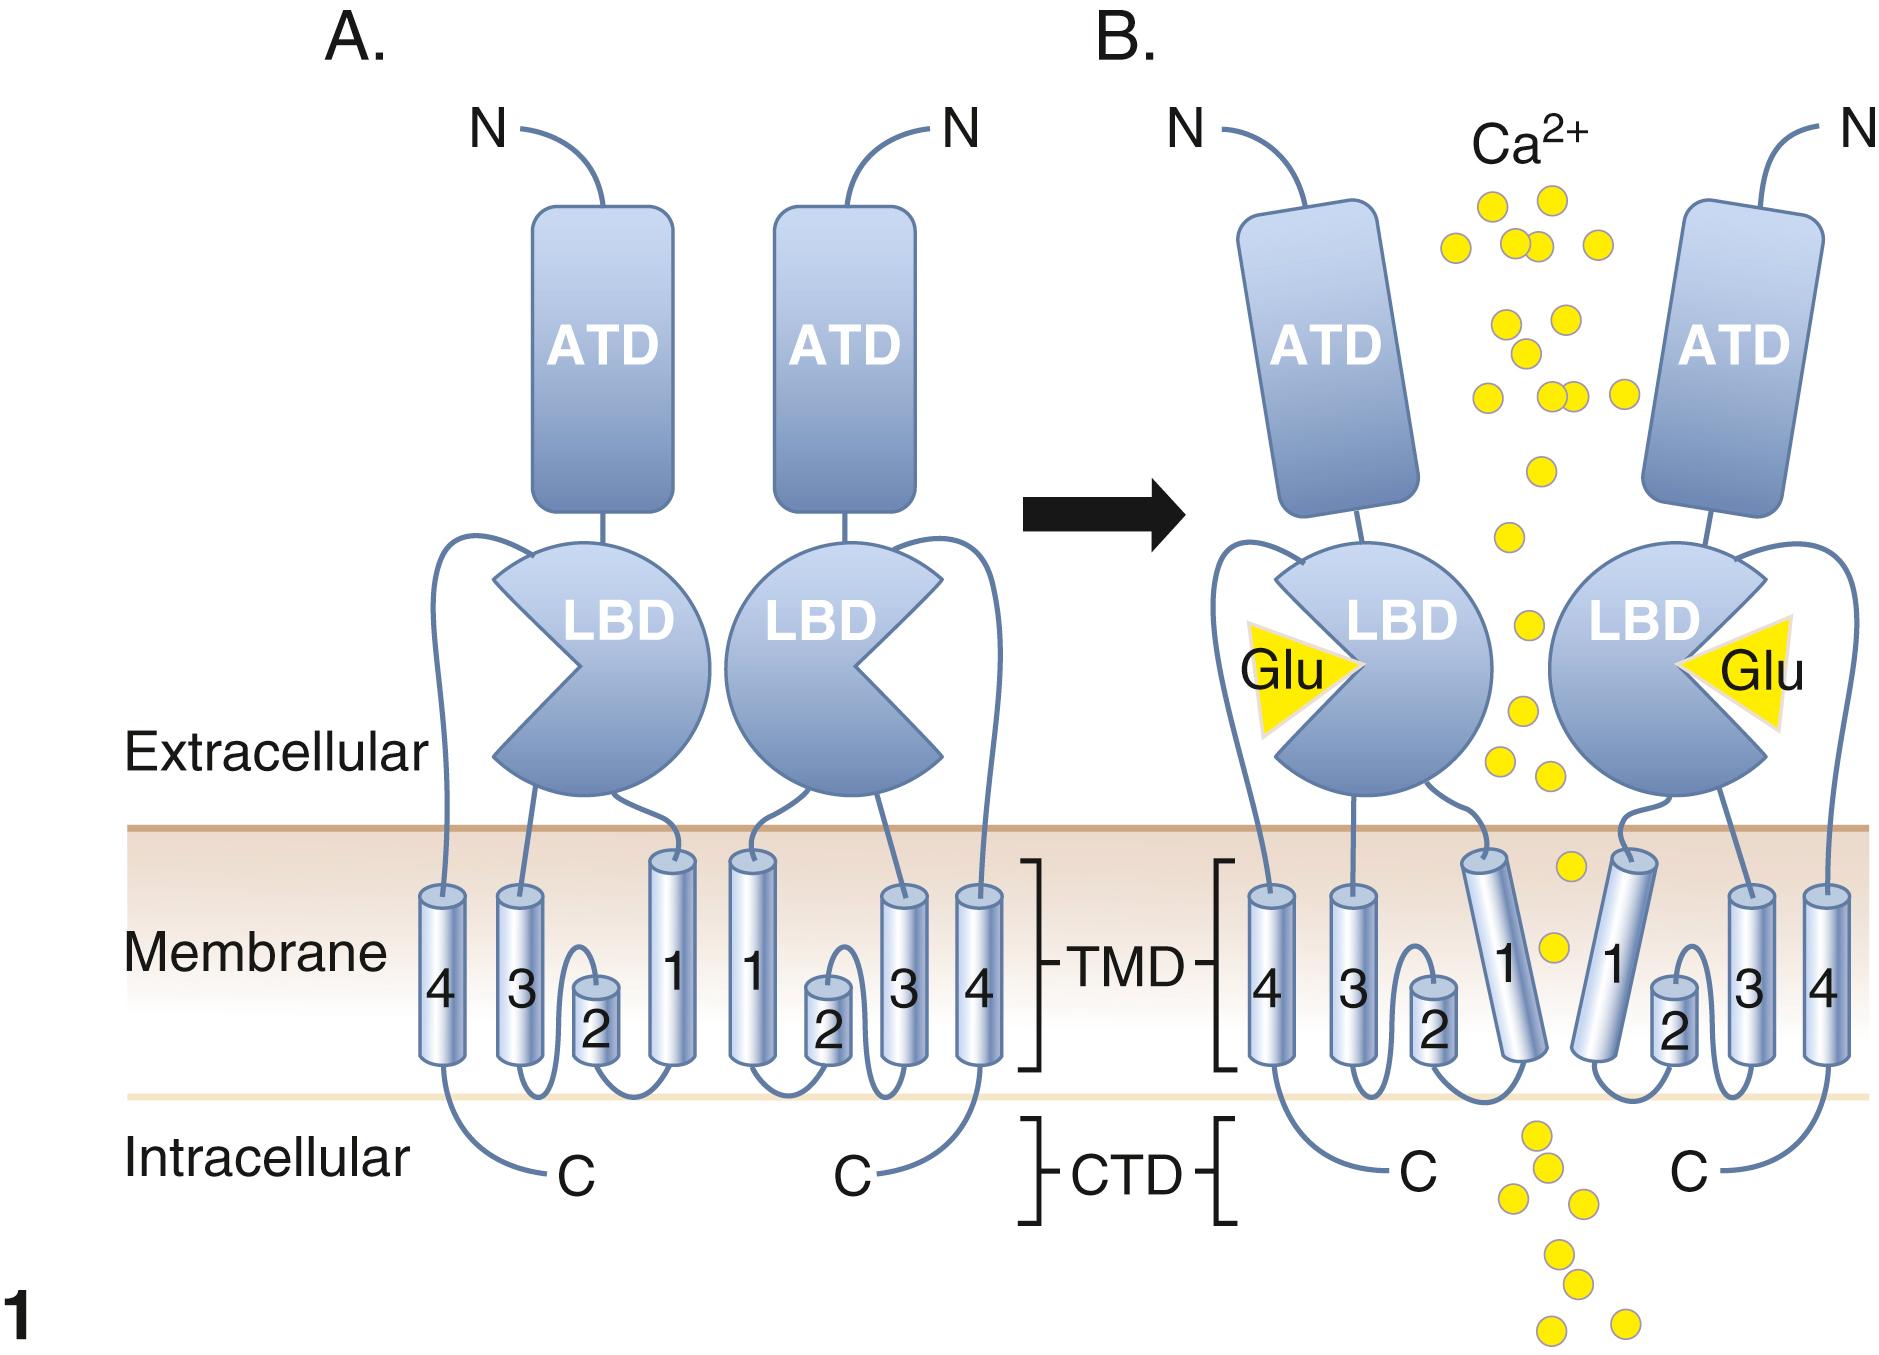 Fig. 73.1, Panel 1, iGluR structure and activation of this receptor. The receptor is shown as a dimer, represented by two symmetrically arranged polypeptide chains (subunits) in mirror-image fashion. Although this figure shows a dimeric structure, the actual receptor is a tetramer that lines an ion channel. Beginning at the N terminus (N), the amino terminal domain (ATD) is followed by the ligand binding domain (LBD), constituting the extracellular domain (Extracellular). This is followed by the four transmembrane domains ( TMD ; numbered 1–4) and the C-terminal domain (CTD). Panel 1A shows the resting conformation of iGluR. Panel 1B shows that when Glu binds to the Glu ligand binding site, the subunits rearrange such as to cause opening of the channel allowing calcium ions to diffuse into the cell. Panel 2, mGluR schematic structure and signal transduction pathways induced by it. This receptor is activated when two glutamate molecules bind to each of two extracellular domains of two adjacent receptors. This promotes dimerization of the two receptors resulting in activation of the intracytoplasmic domain of the receptor resulting in its binding to a G protein α-β-ϒ complex. The Gα subunit is activated and induces activation of a series of signal transduction pathways. Proceeding from left to right, this protein binds to two scaffolding proteins, Homer and Shank. This trimeric complex activates phosphoinositide-3-hydroxykinase (PI3K), which induces synthesis of inositol-3-phosphate (IP3R) that binds to a receptor (purple triangles) in the endoplasmic reticulum (yellow/brown structures) resulting in release of calcium ions (yellow circles) . IP3 also activates CaMKII (calcium-calmodulin-dependent protein kinase II), that promotes long-term calcium-dependent potentiation. PI3K also activates Akt, a cell proliferation-promoting protein, which also blocks apoptosis. Activated Gα also activates the serine-threonine kinases, raf, MEK (mitogenic extracellular receptor-dependent kinase) and MAPK (mitogen activated protein kinase). The latter, when phosphorylated, transfers across the nuclear membrane into the nucleus where it activates (phosphorylates) the centrally important transcription factor, fos. Activated fos forms a heterodimeric complex with activated jun, another centrally important transcription factor, activated separately by jun kinase (JNK) to form an active transcription factor, fos-jun, that induces transcription and translation of multiple mitogenic proteins.